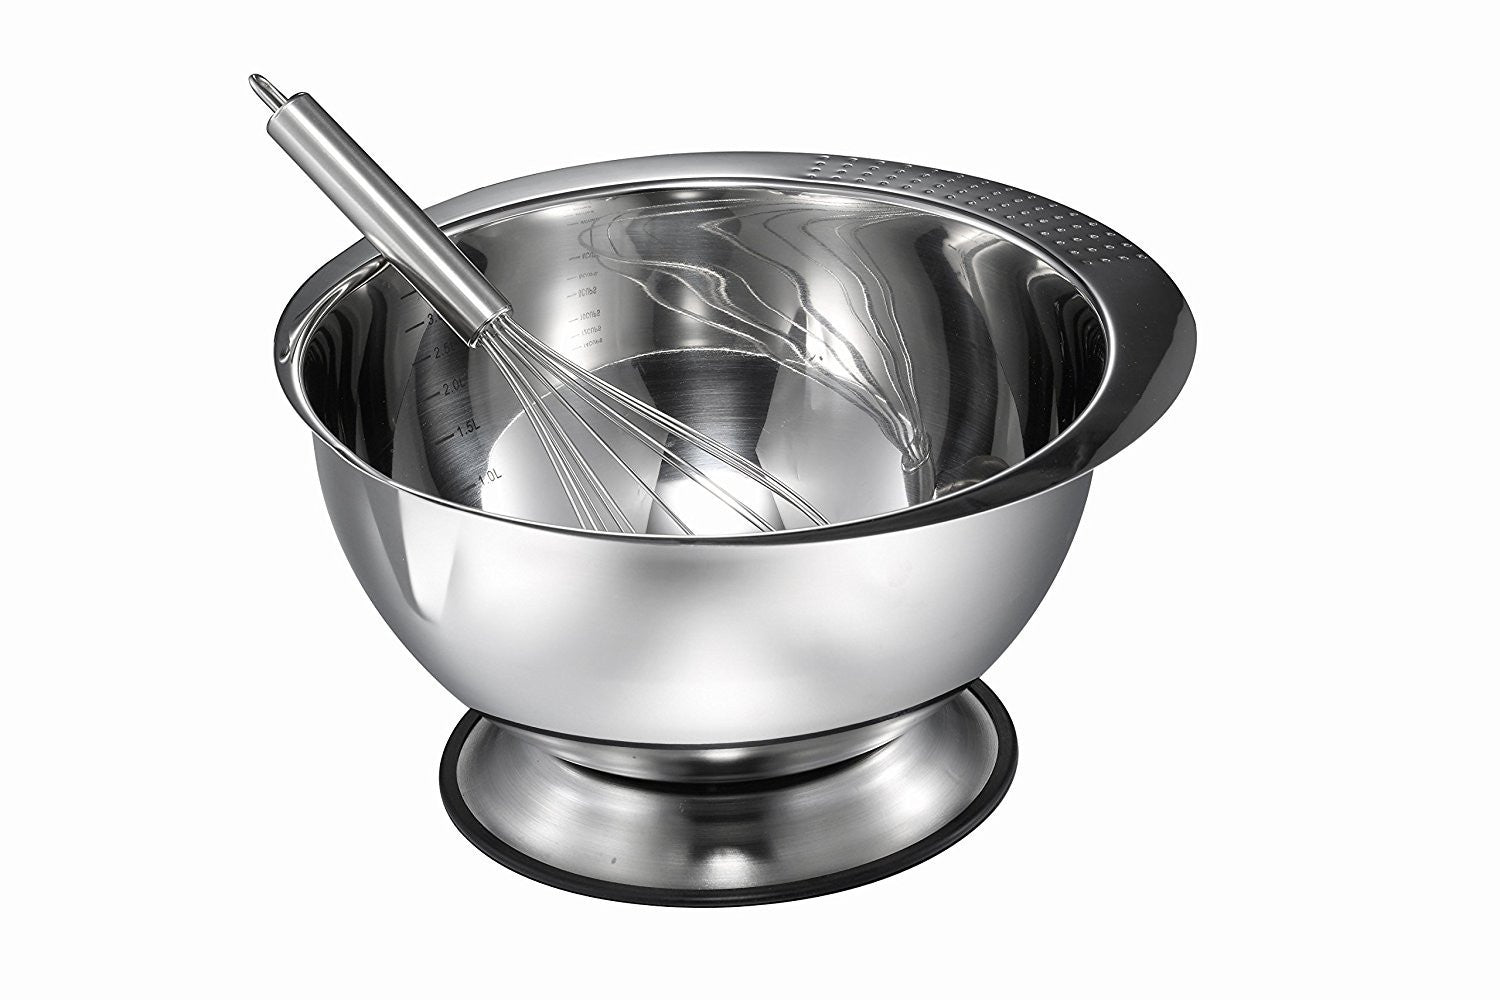 [24 Pack] 5 Quart Medium Stainless Steel Mixing Bowl - Baking Bowl, Flat  Base Bowl, Preparation Bowls - Great for Baking, Kitchens, Chef's, Home use